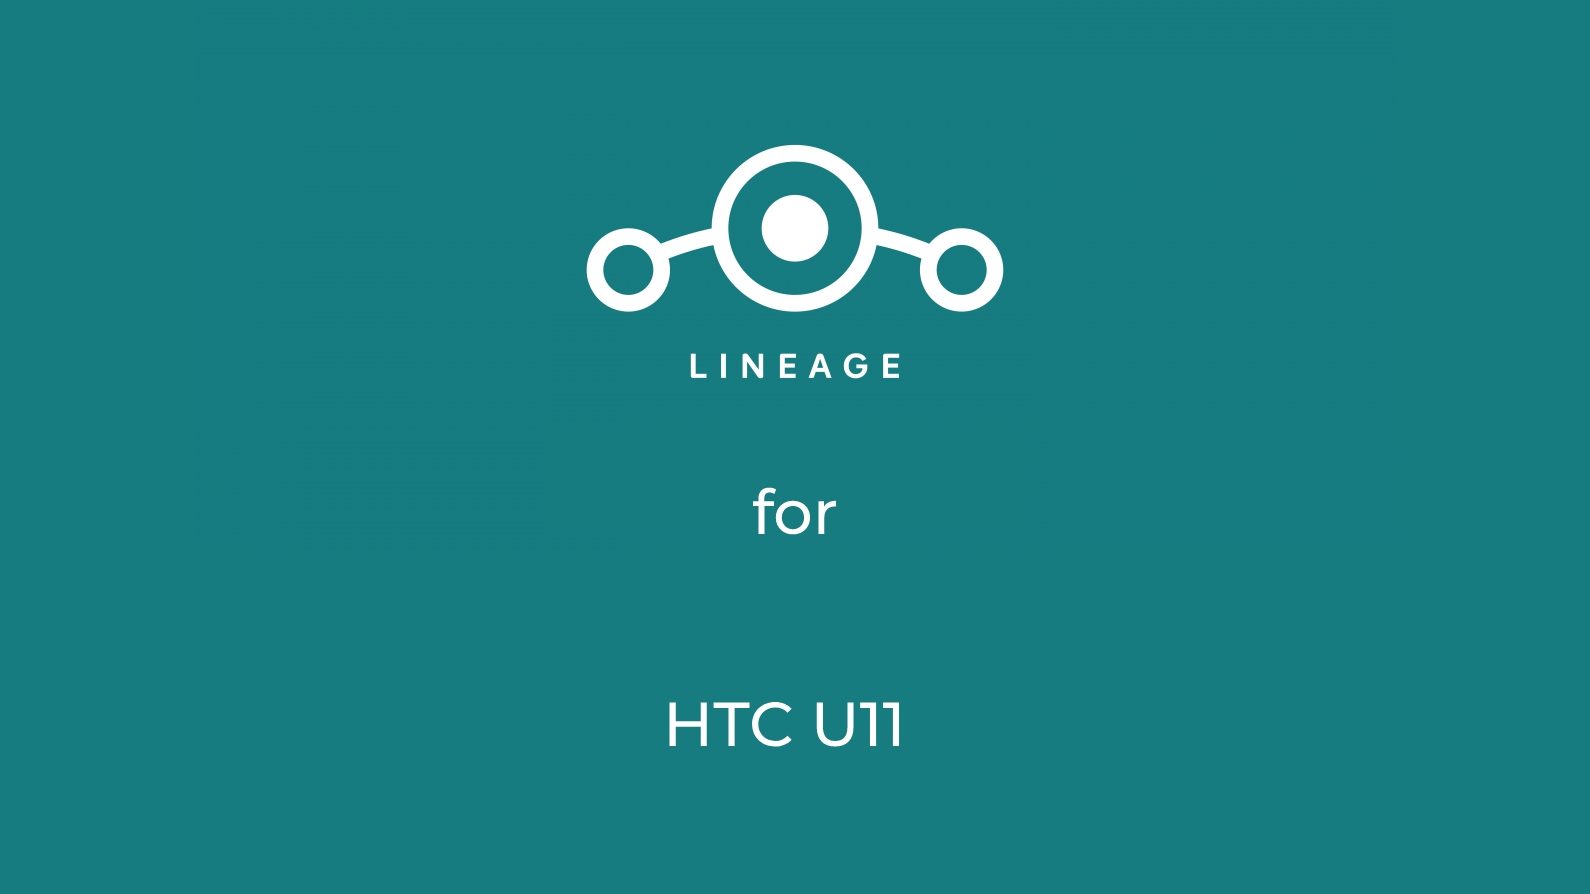 Download LineageOS 18.1 for HTC U11 (Android 11)